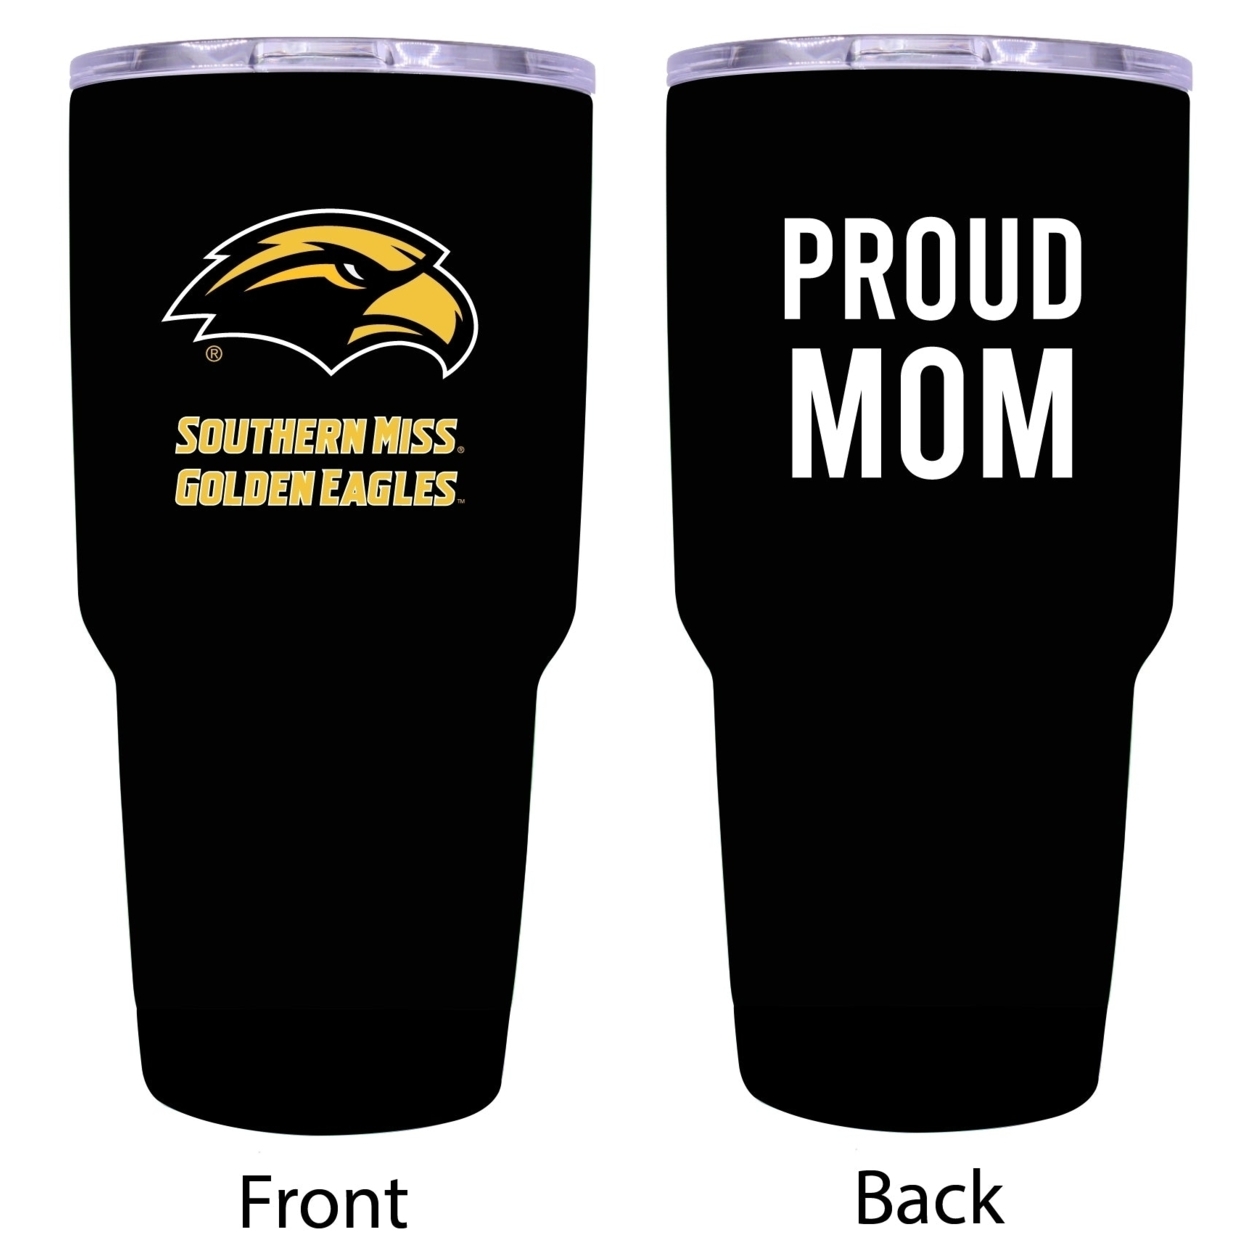 R And R Imports Southern Mississippi Golden Eagles Proud Mom 24 Oz Insulated Stainless Steel Tumblers Black.